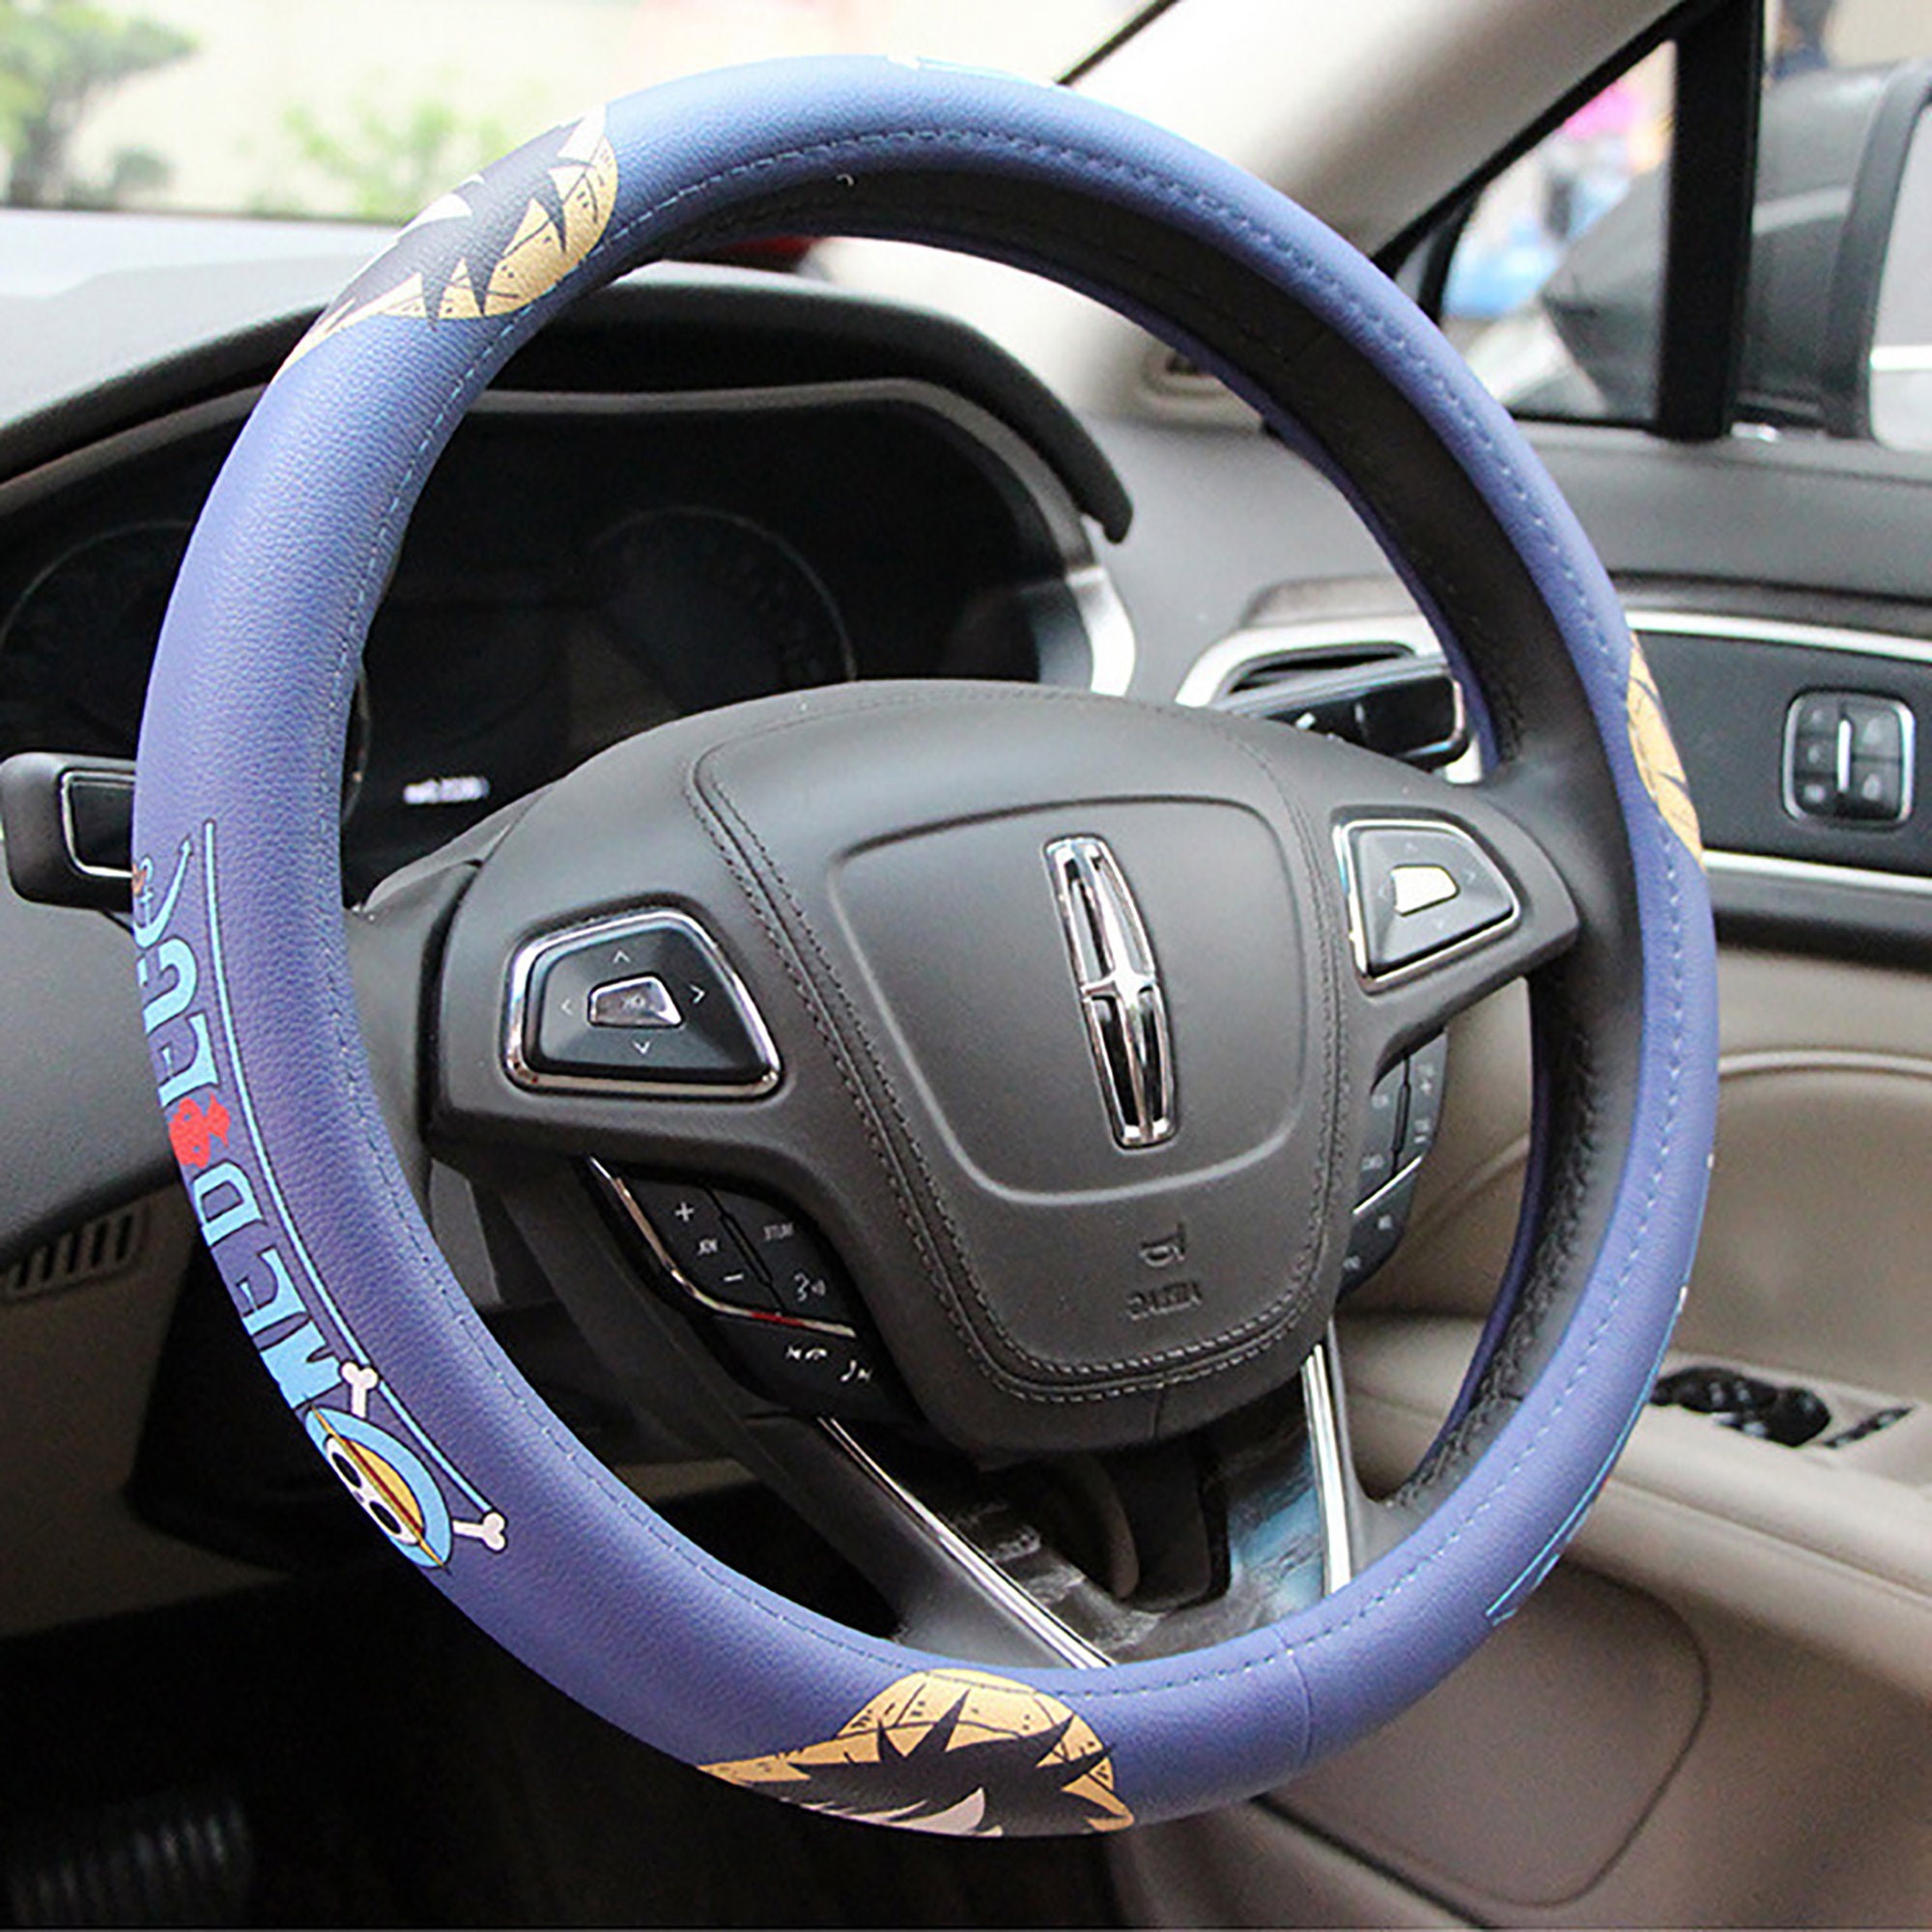 Steering wheel cover,Luffy straw hat,leather